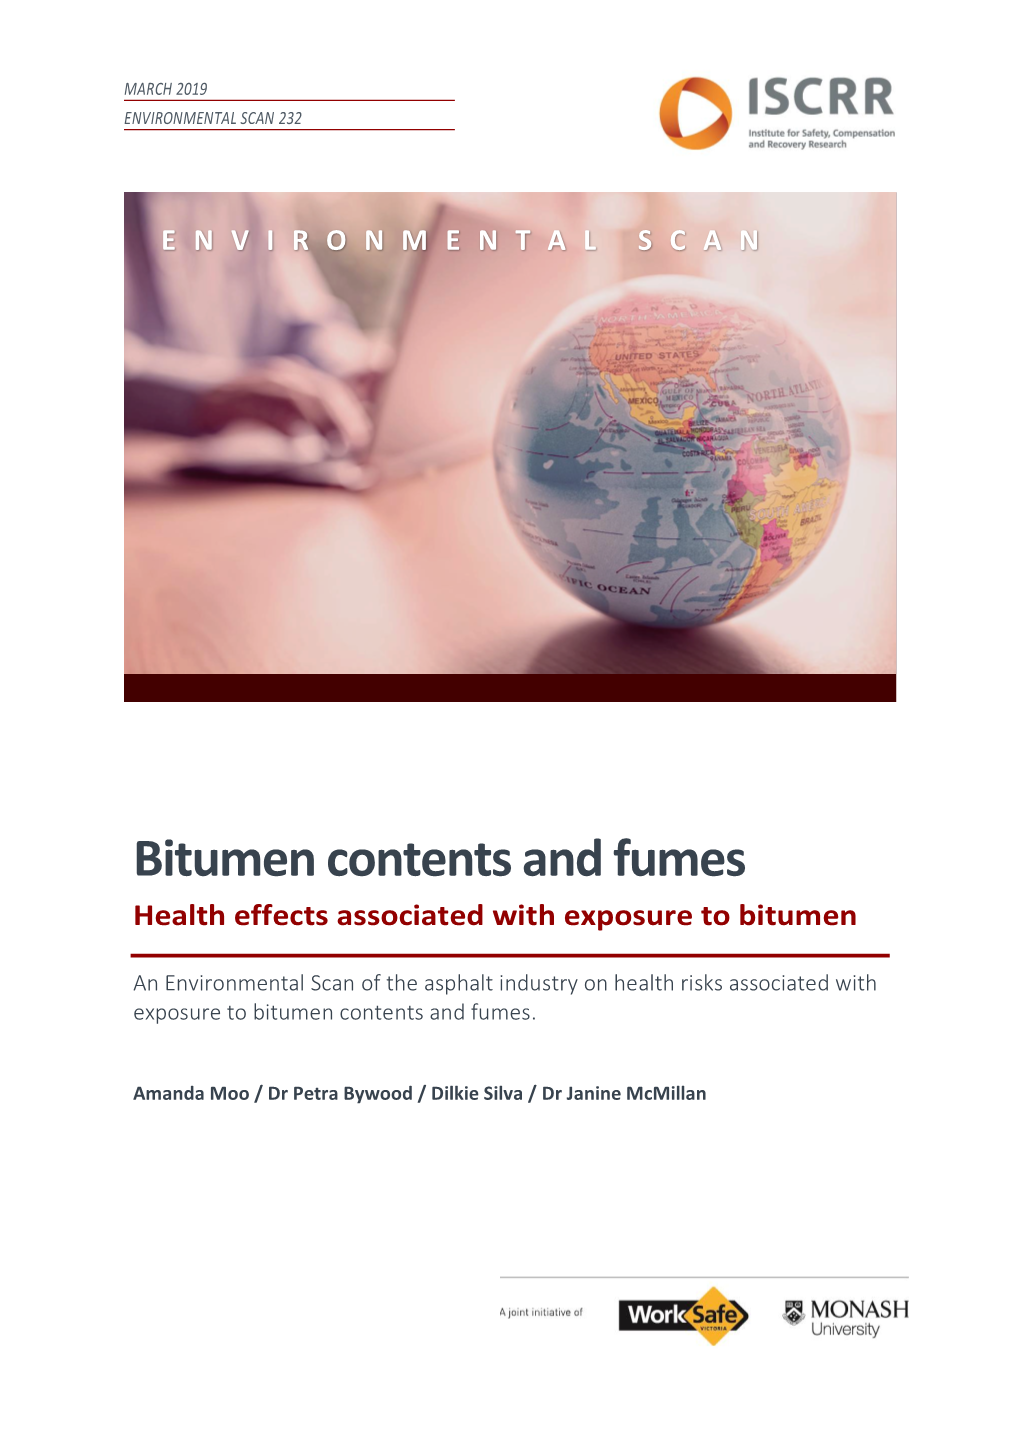 Bitumen Contents and Fumes: Health Effects Associated with Exposure To